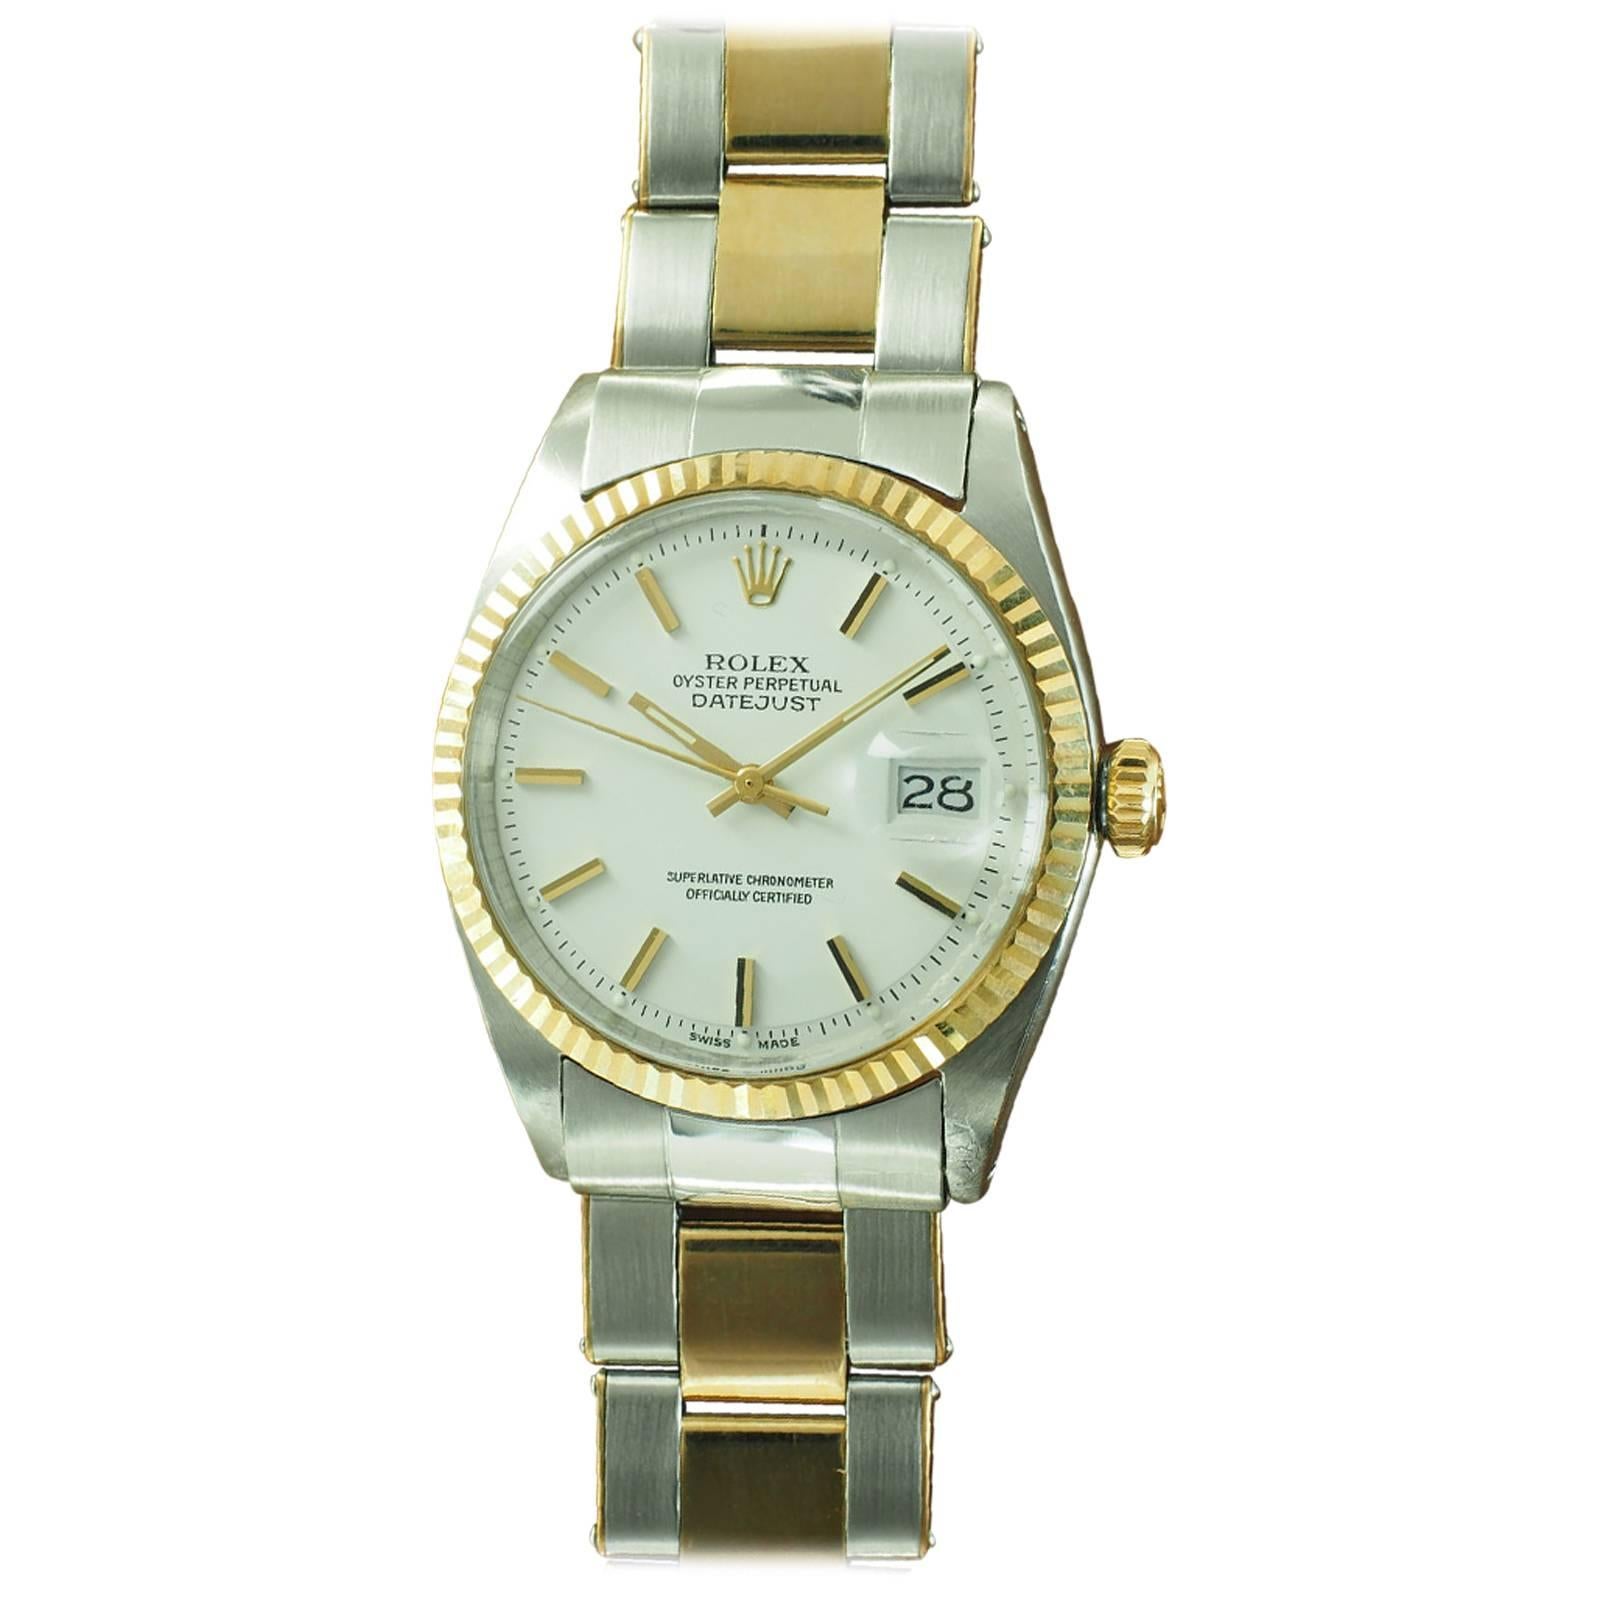 Rolex Yellow Gold Stainless Steel White Dial Datejust Wristwatch Ref 1601  For Sale